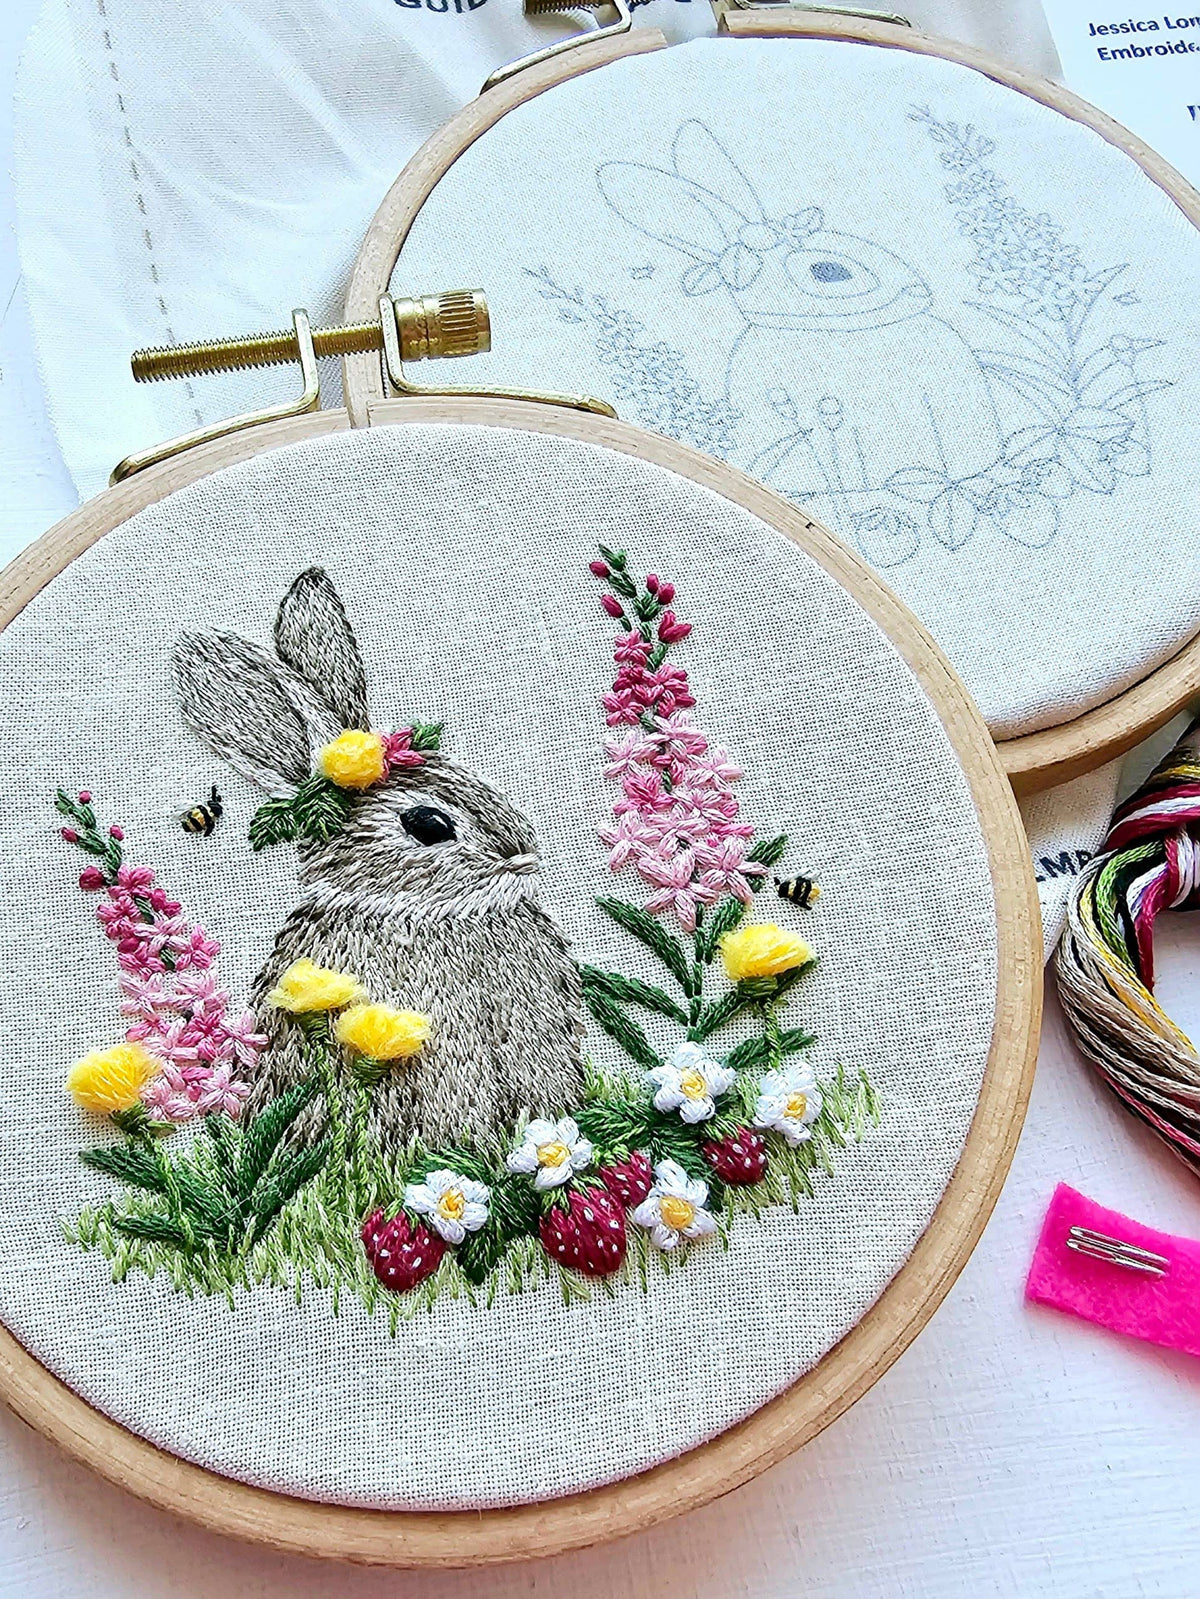 Jessica Long Embroidery Embroidery Kit Berry Patch Bunny Embroidery Craft Kit